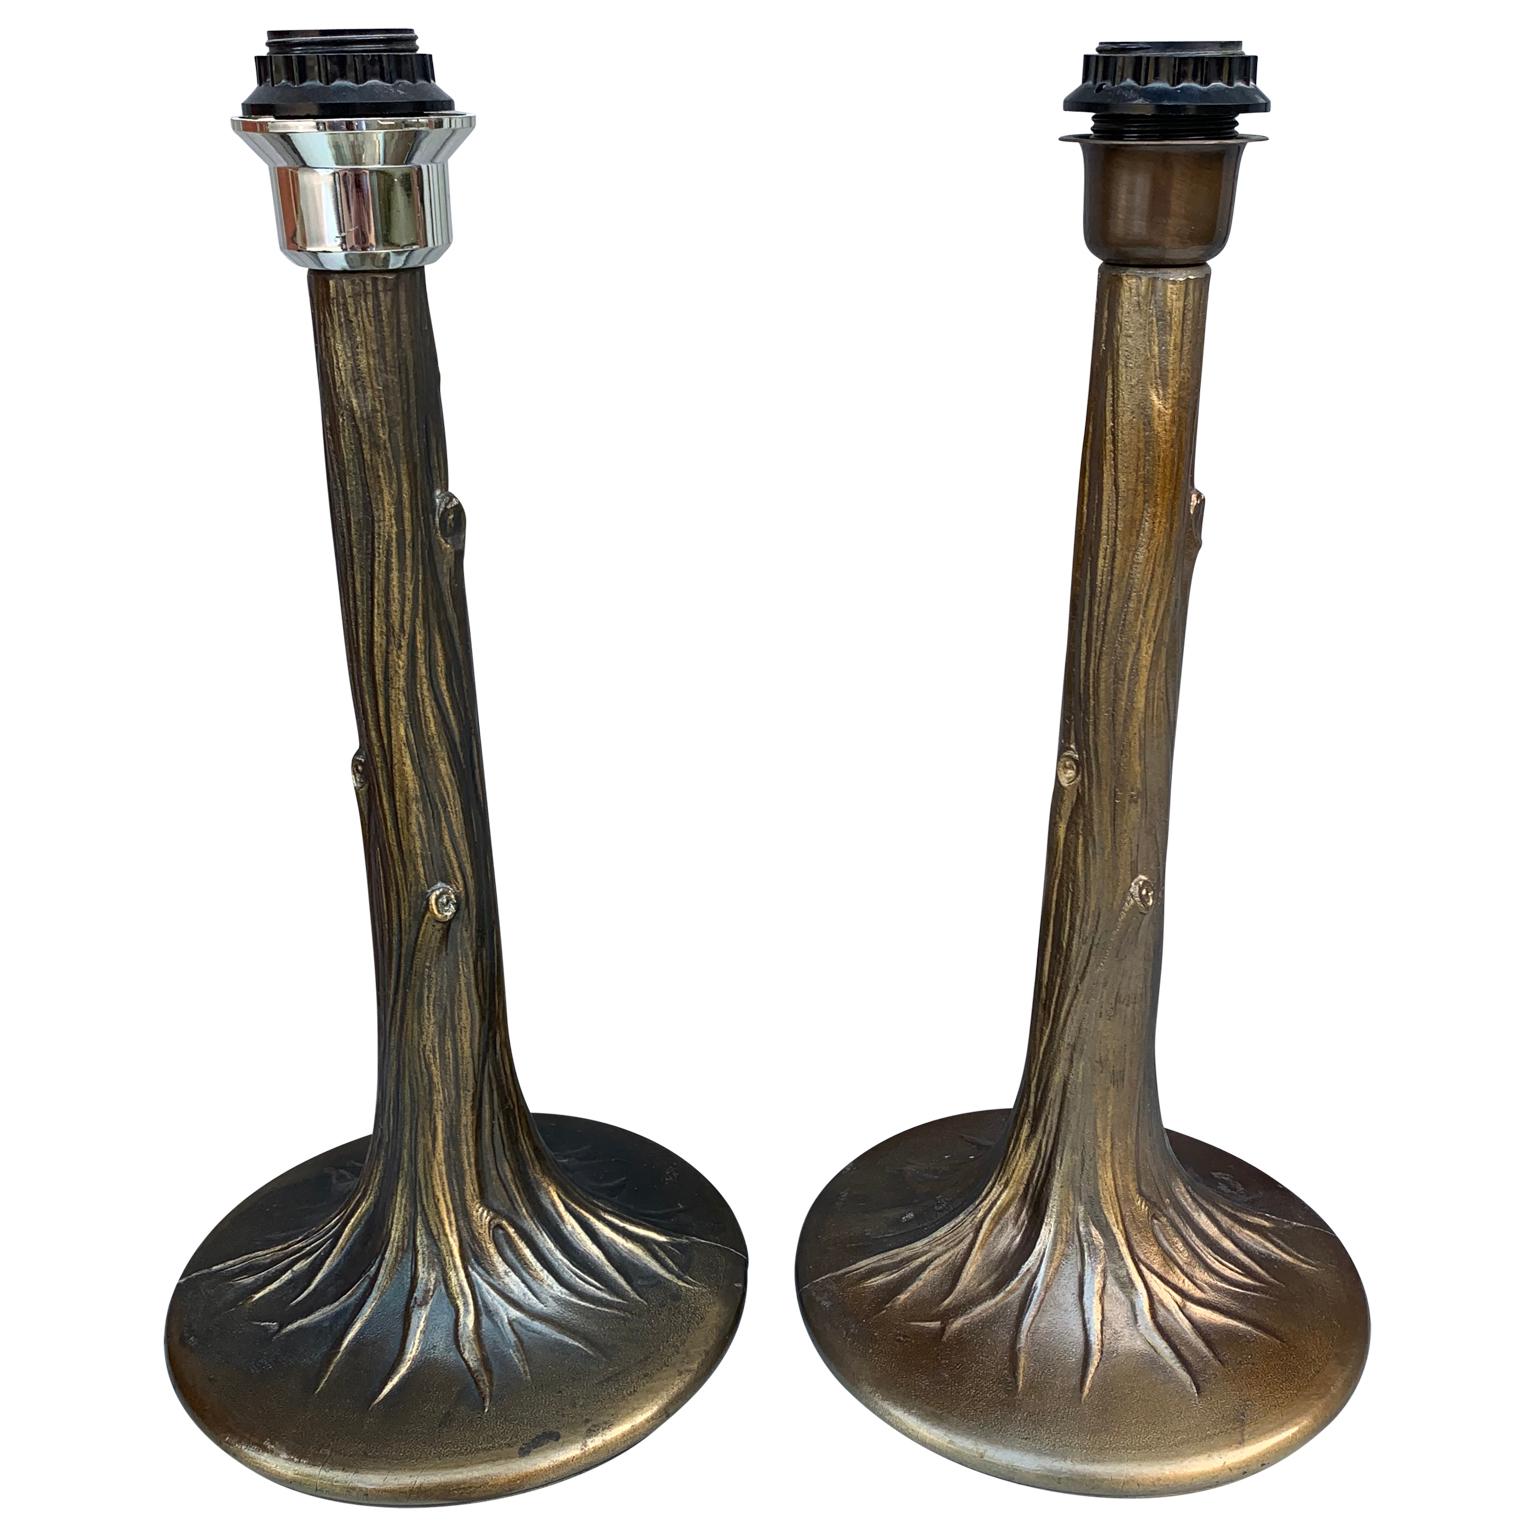 Pair of faux bois table lamps

The lamps are made of thin cast iron and coated in golden metal paint.